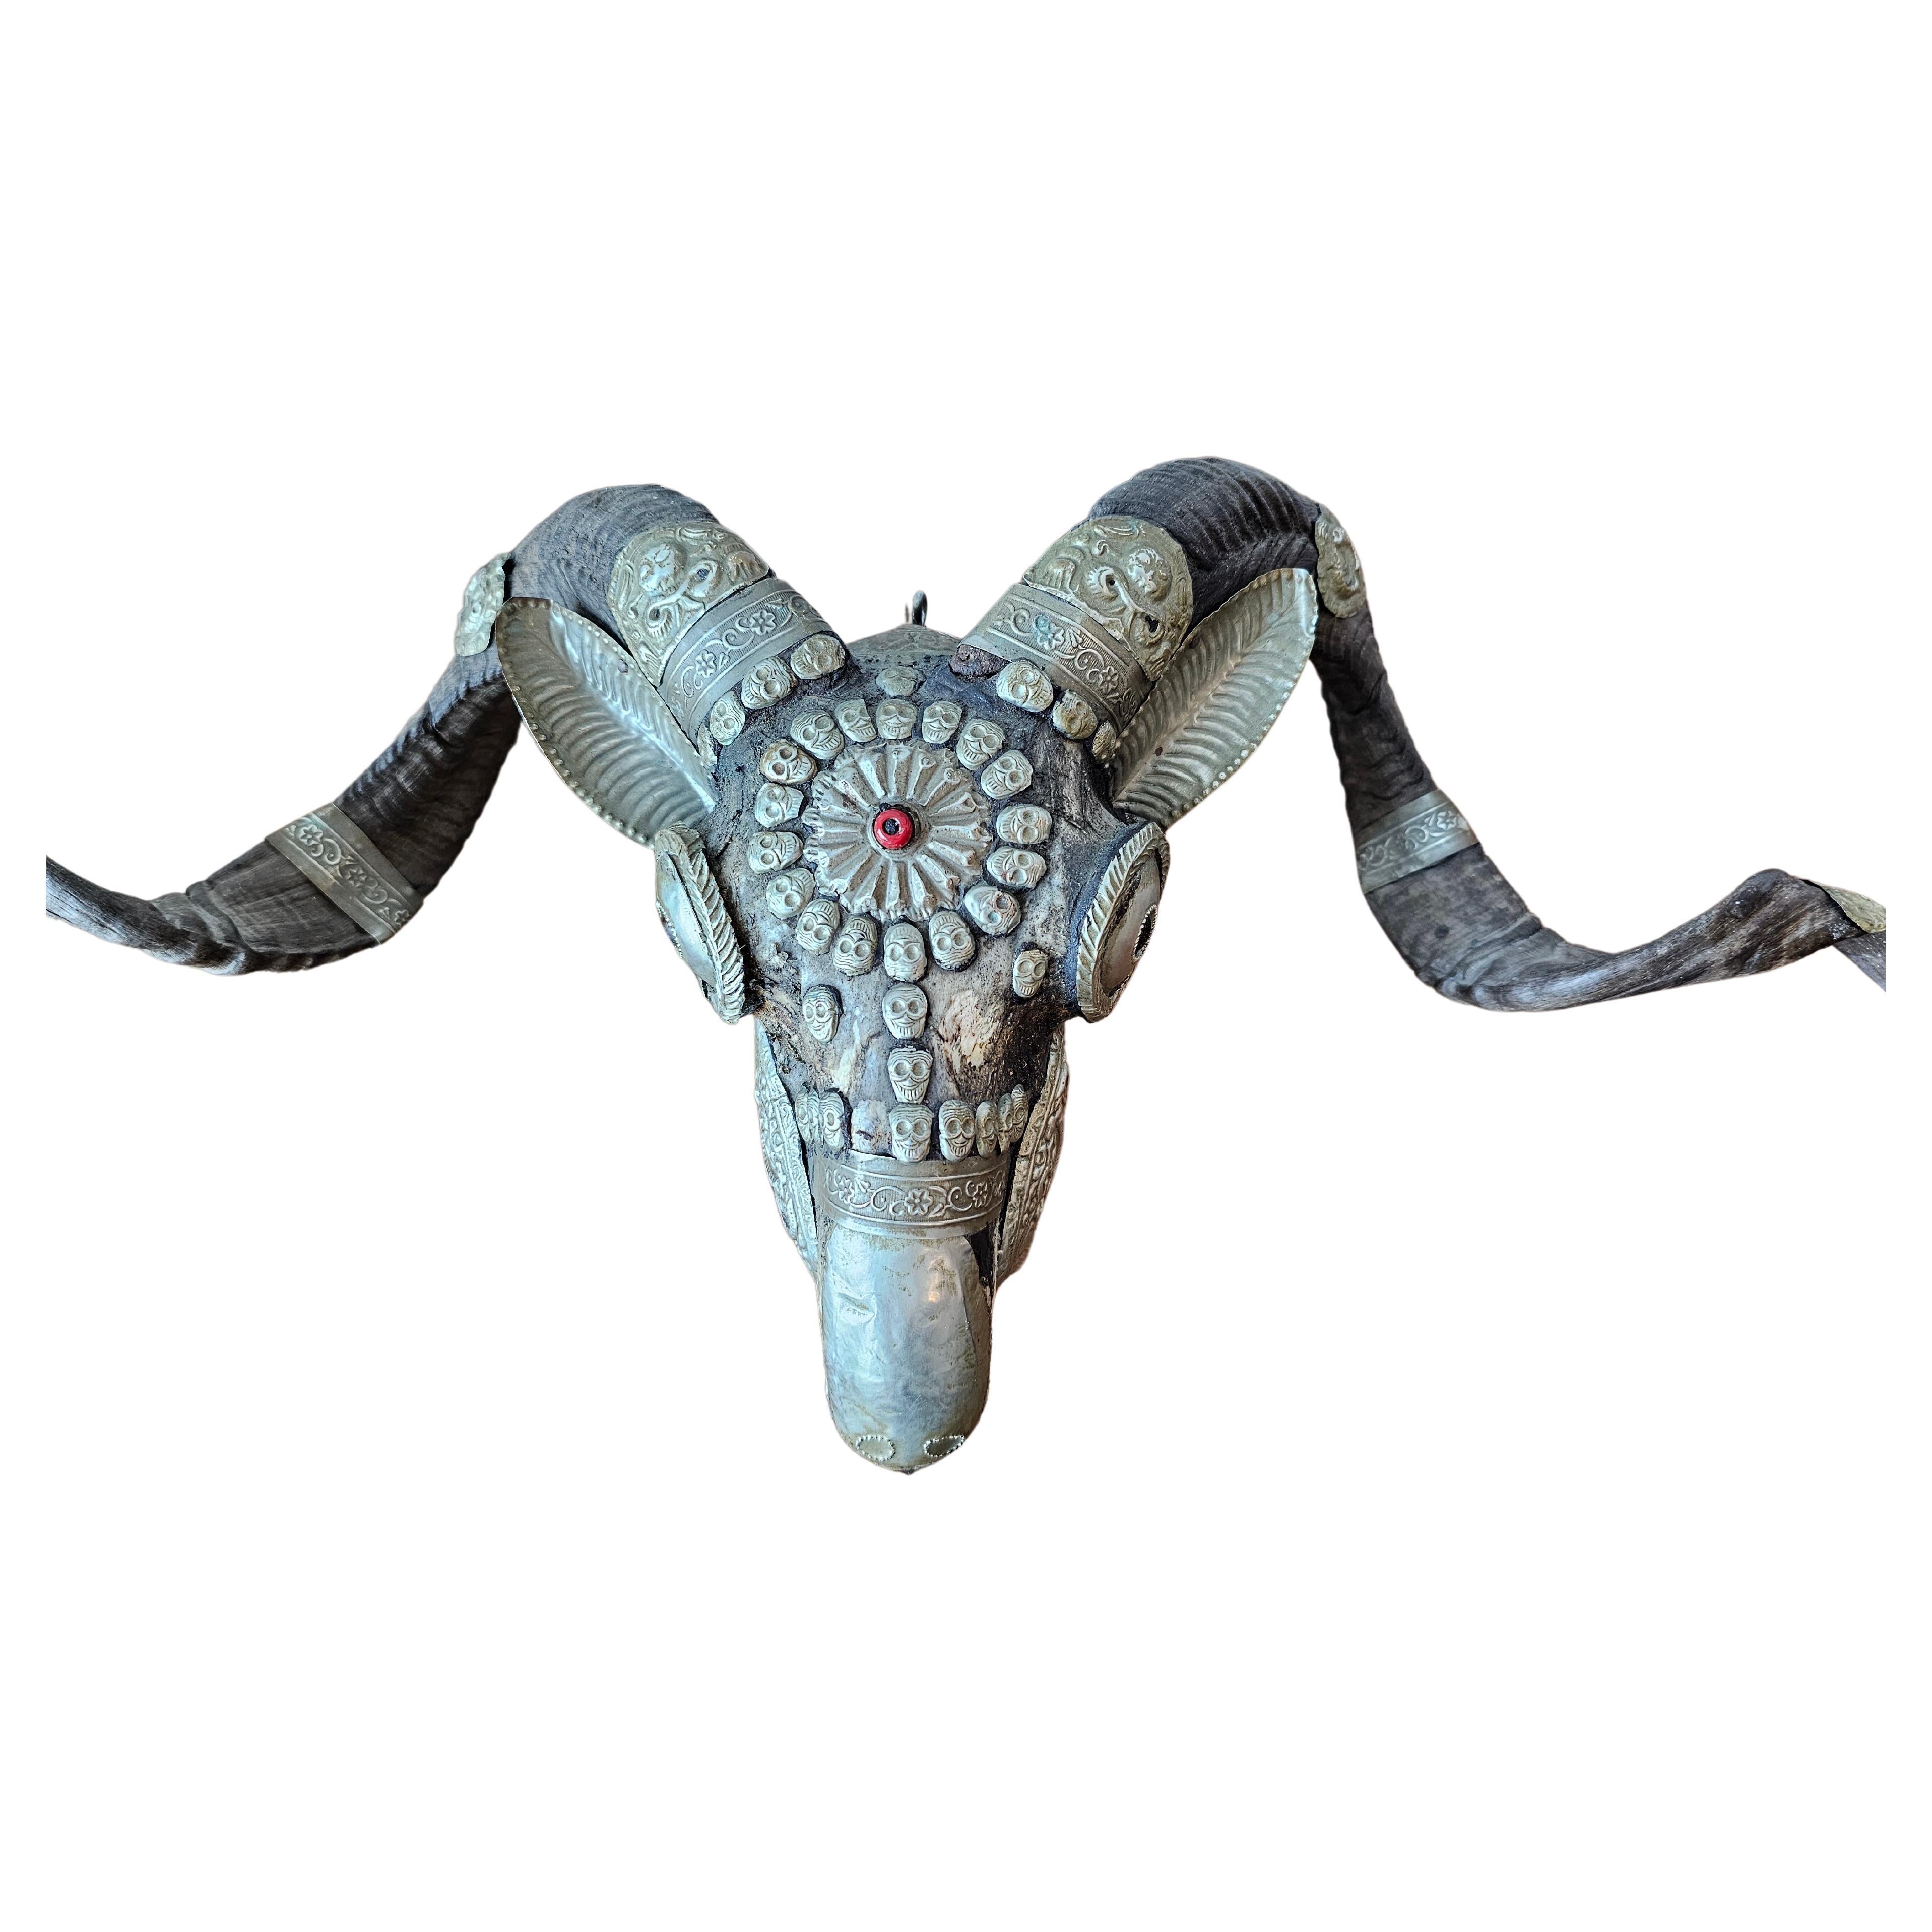 An exceptional antique Tibetan Buddhist monastery ritual / ceremonial goat skull and horn kapala.

Tibet, 19th century, used in shamanic Buddhist Tantra, hand-crafted from a real horned cashmere goat skull, elaborately mounted with repousse silver